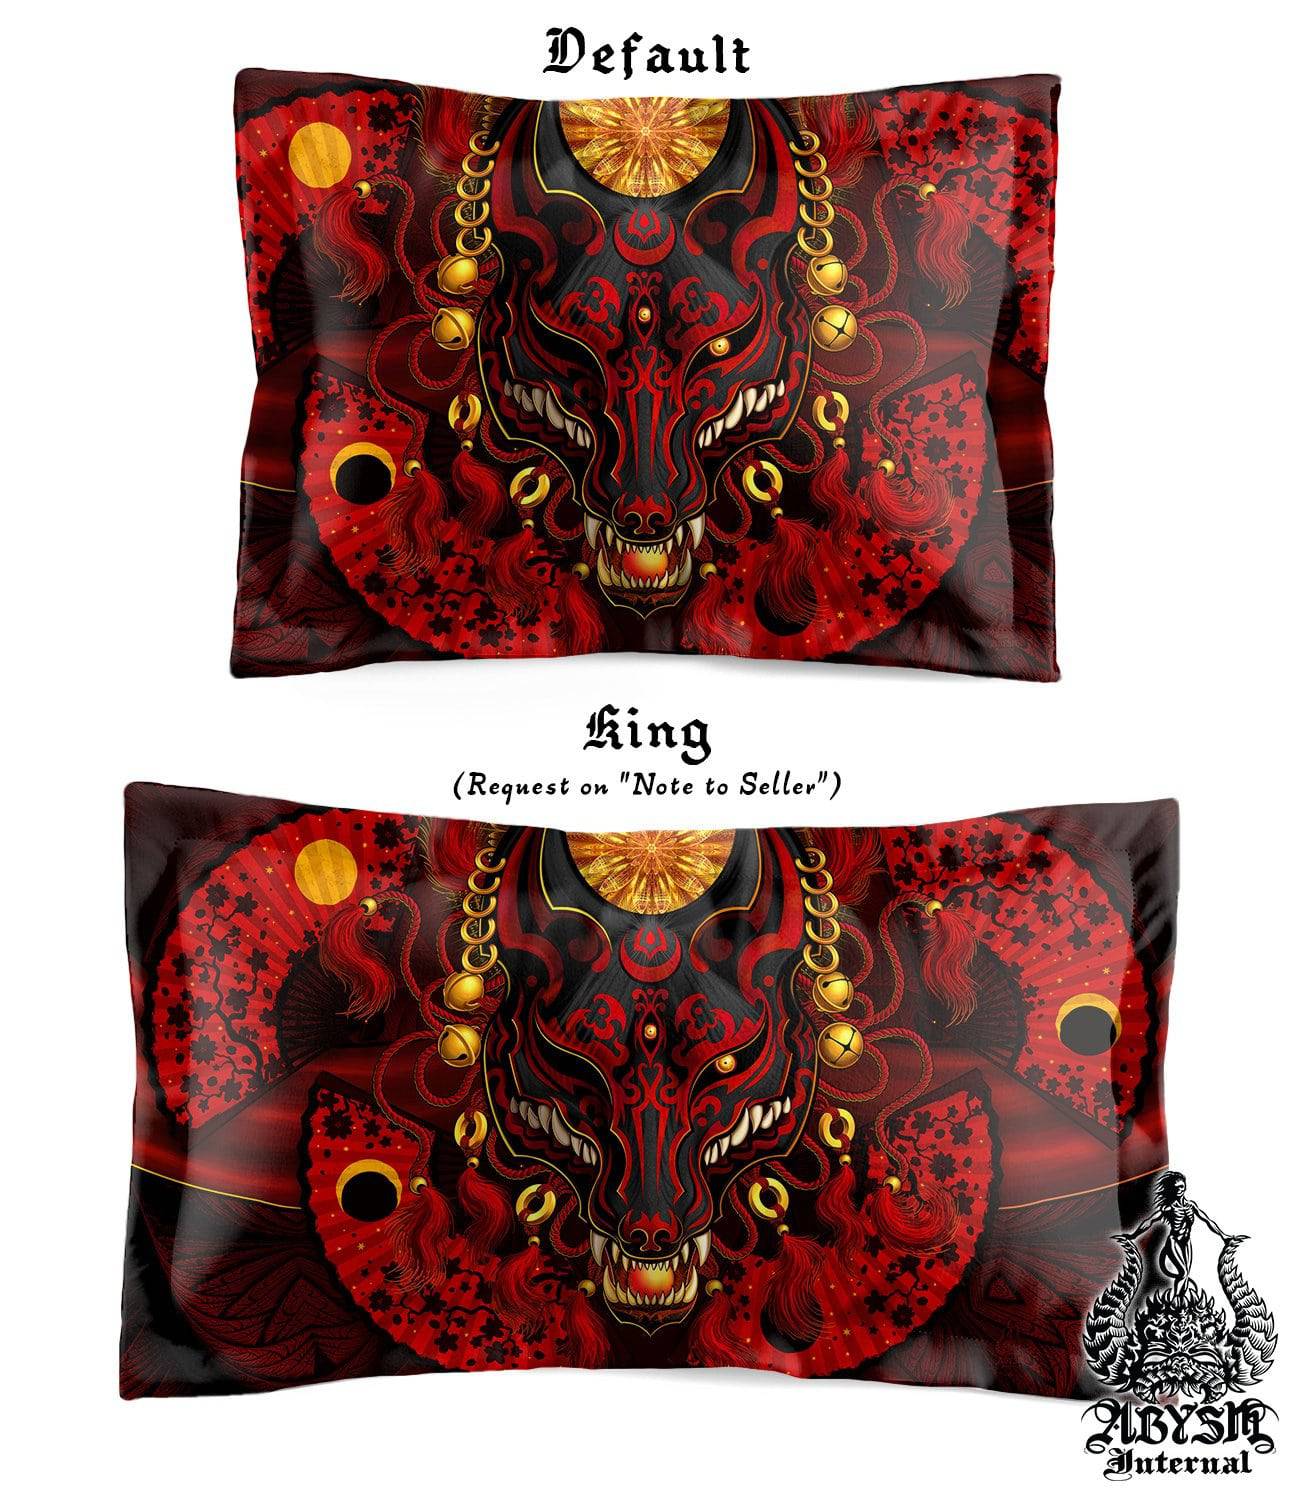 Kitsune Mask Bedding Set, Comforter and Duvet, Gamer Bed Cover and Bedroom Decor, Japanese Fox Mask, Okami, King, Queen and Twin Size - Red and Black - Abysm Internal